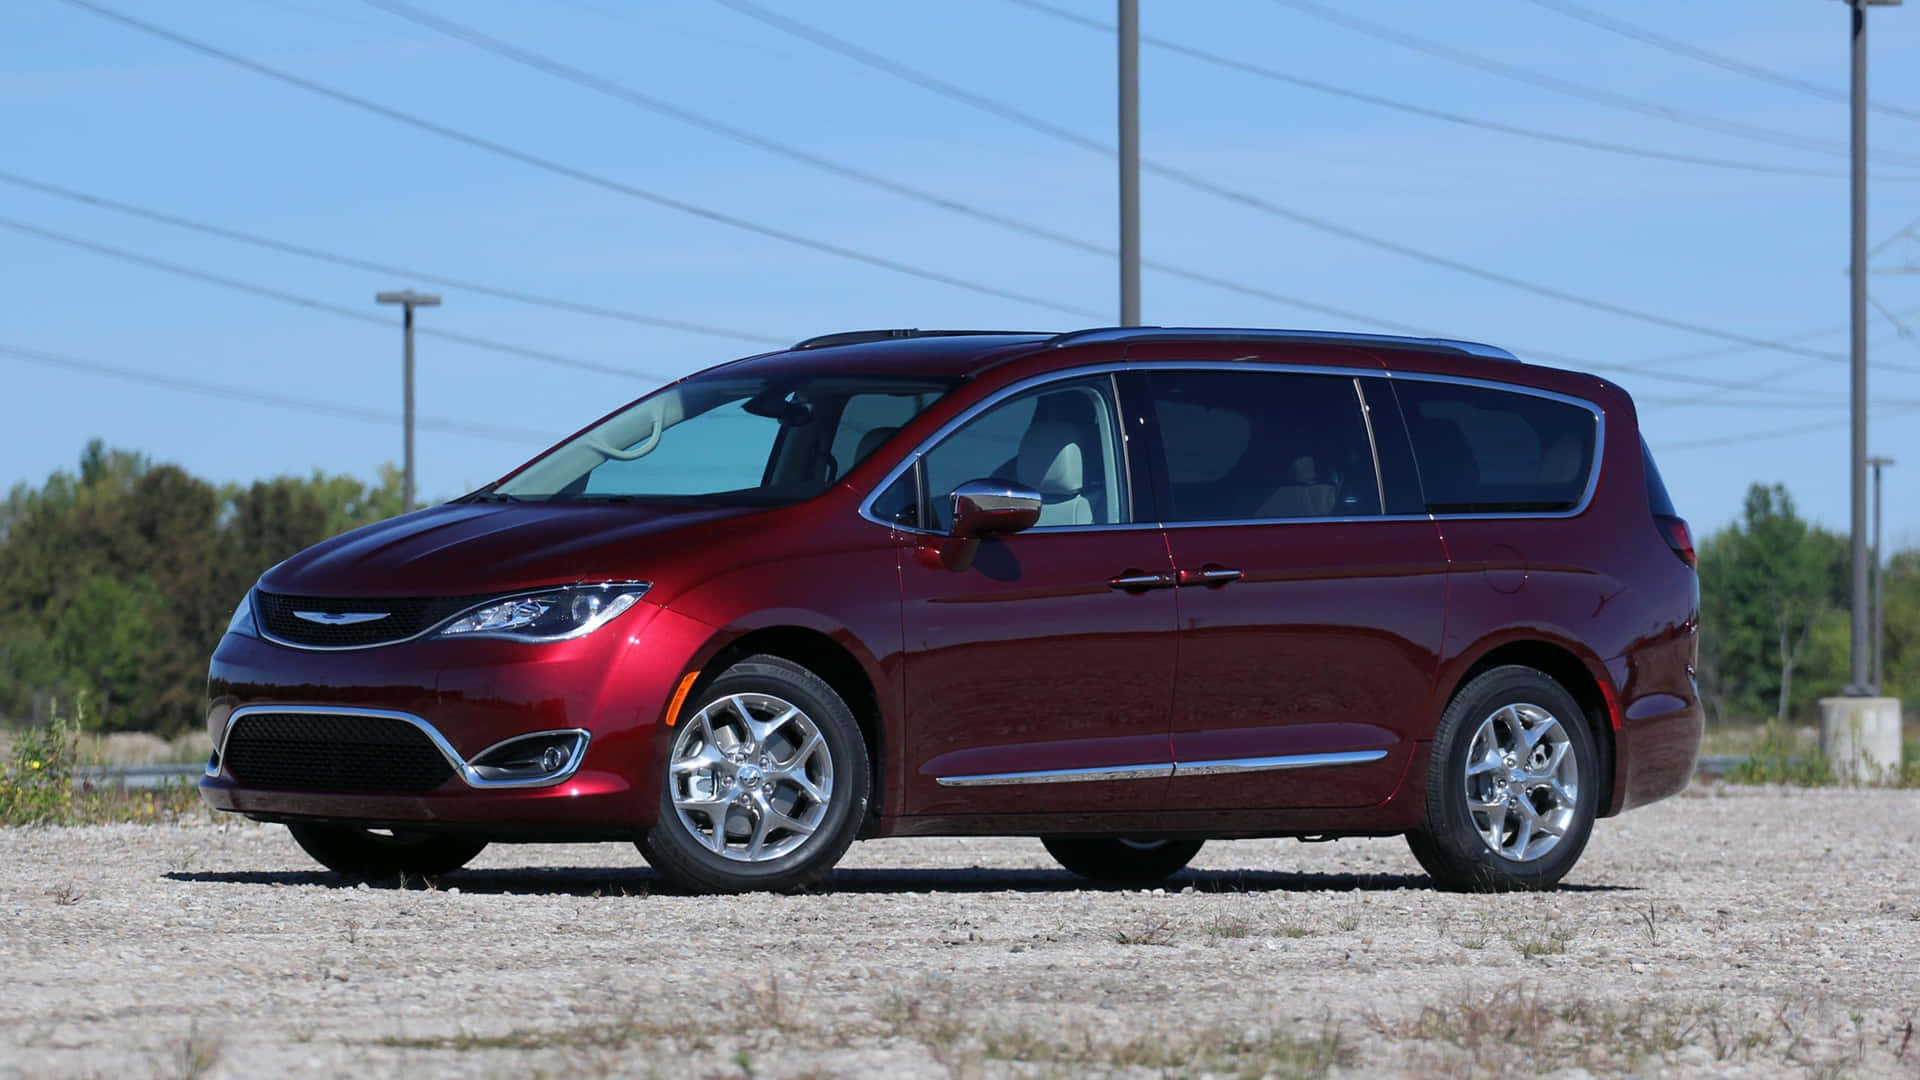 Sleek and Stylish Chrysler Pacifica on the Road Wallpaper